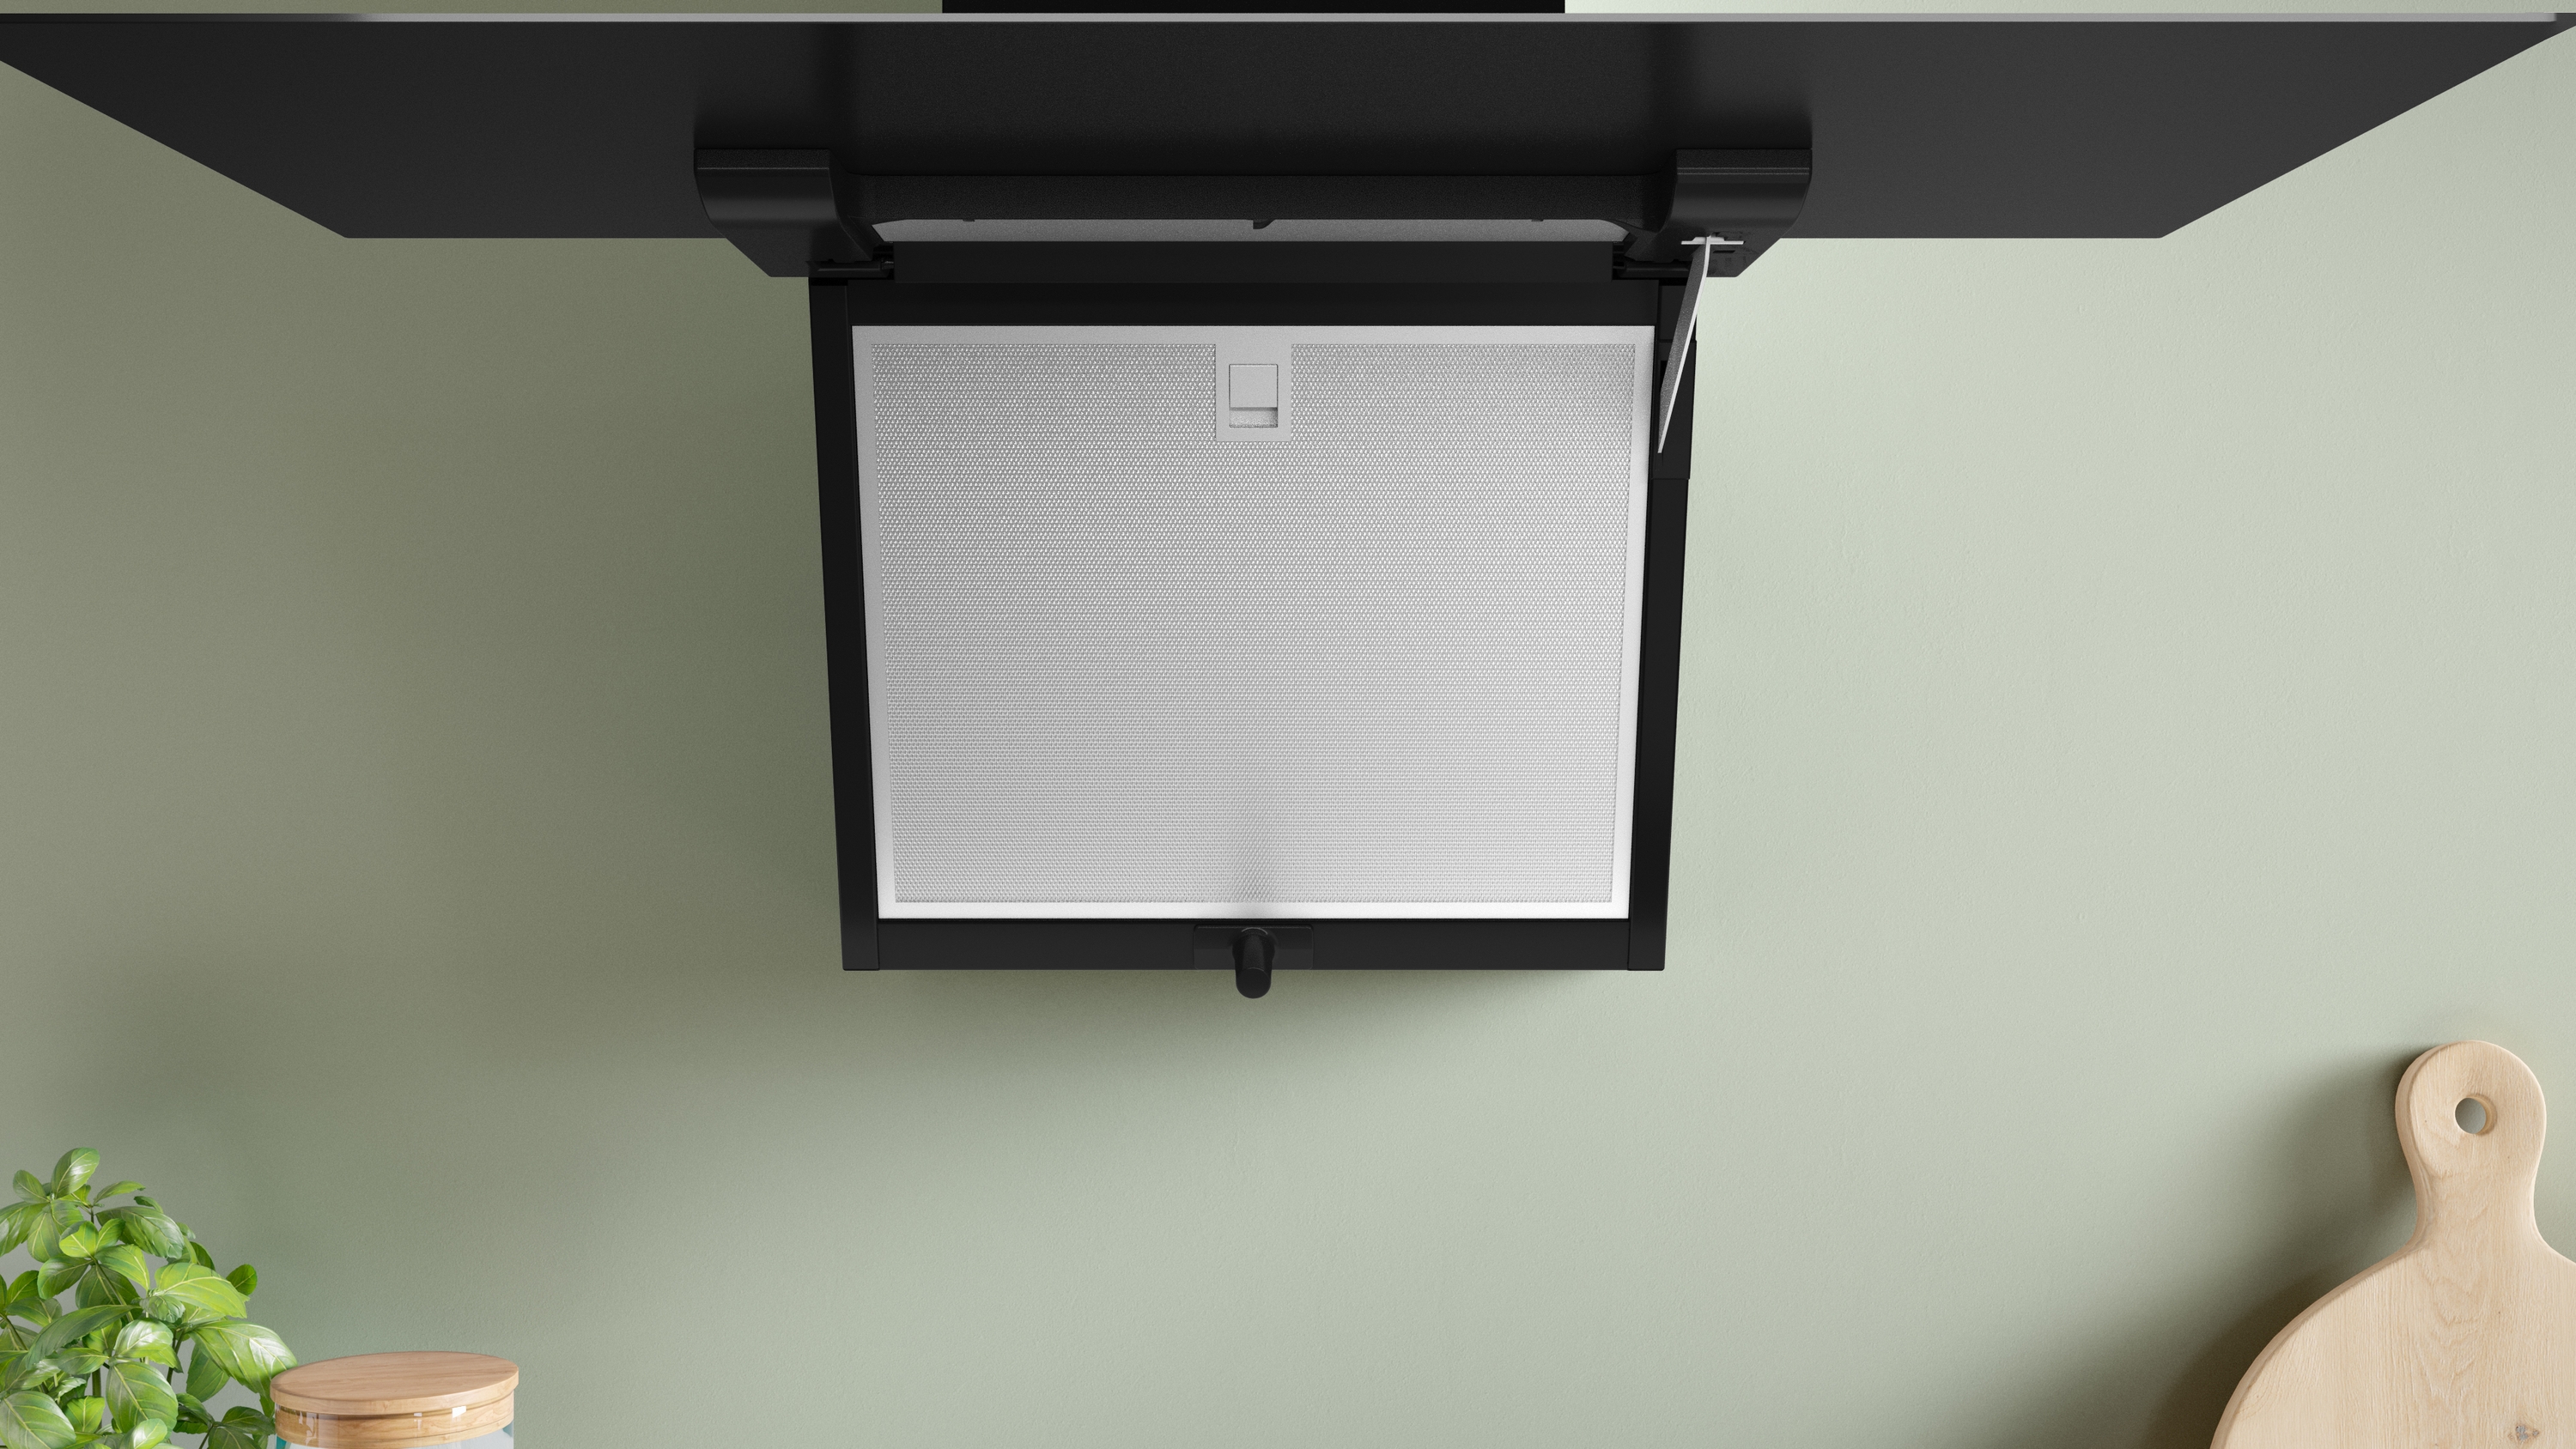 Series 4, wall-mounted cooker hood, 60 cm, clear glass black printed, DWK67FN60